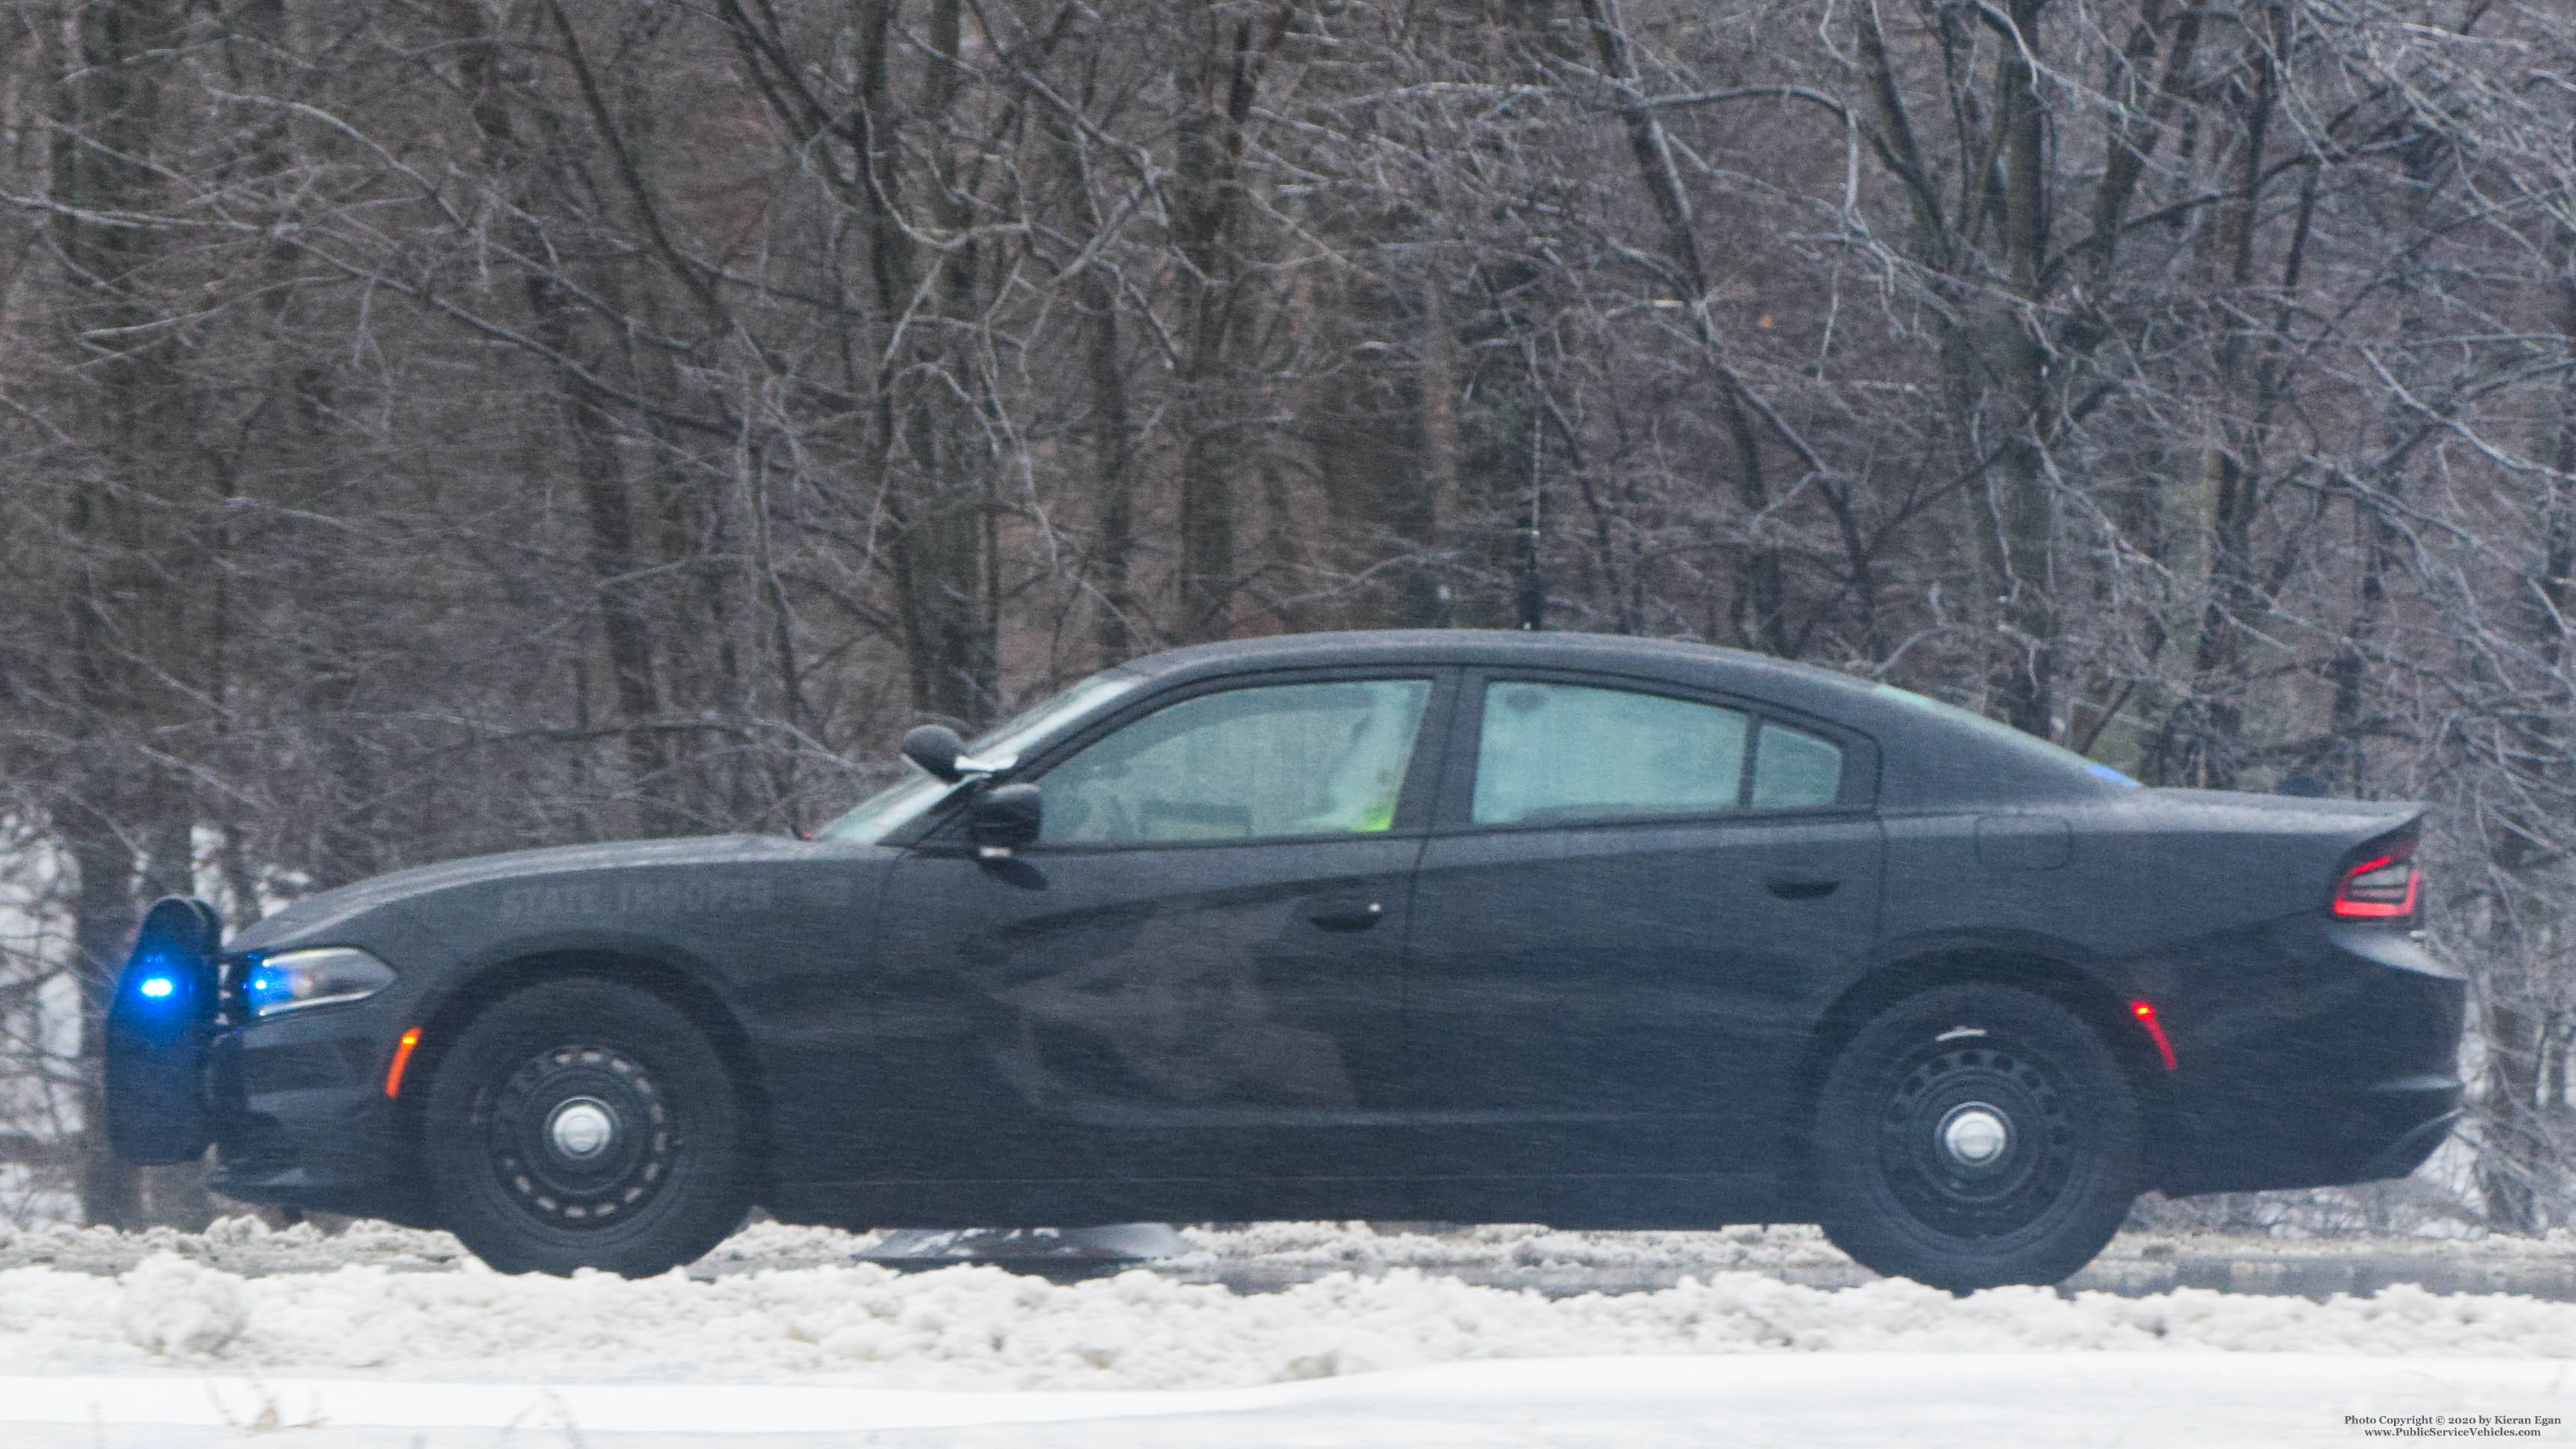 A photo  of New Hampshire State Police
            Cruiser 431, a 2015-2019 Dodge Charger             taken by Kieran Egan